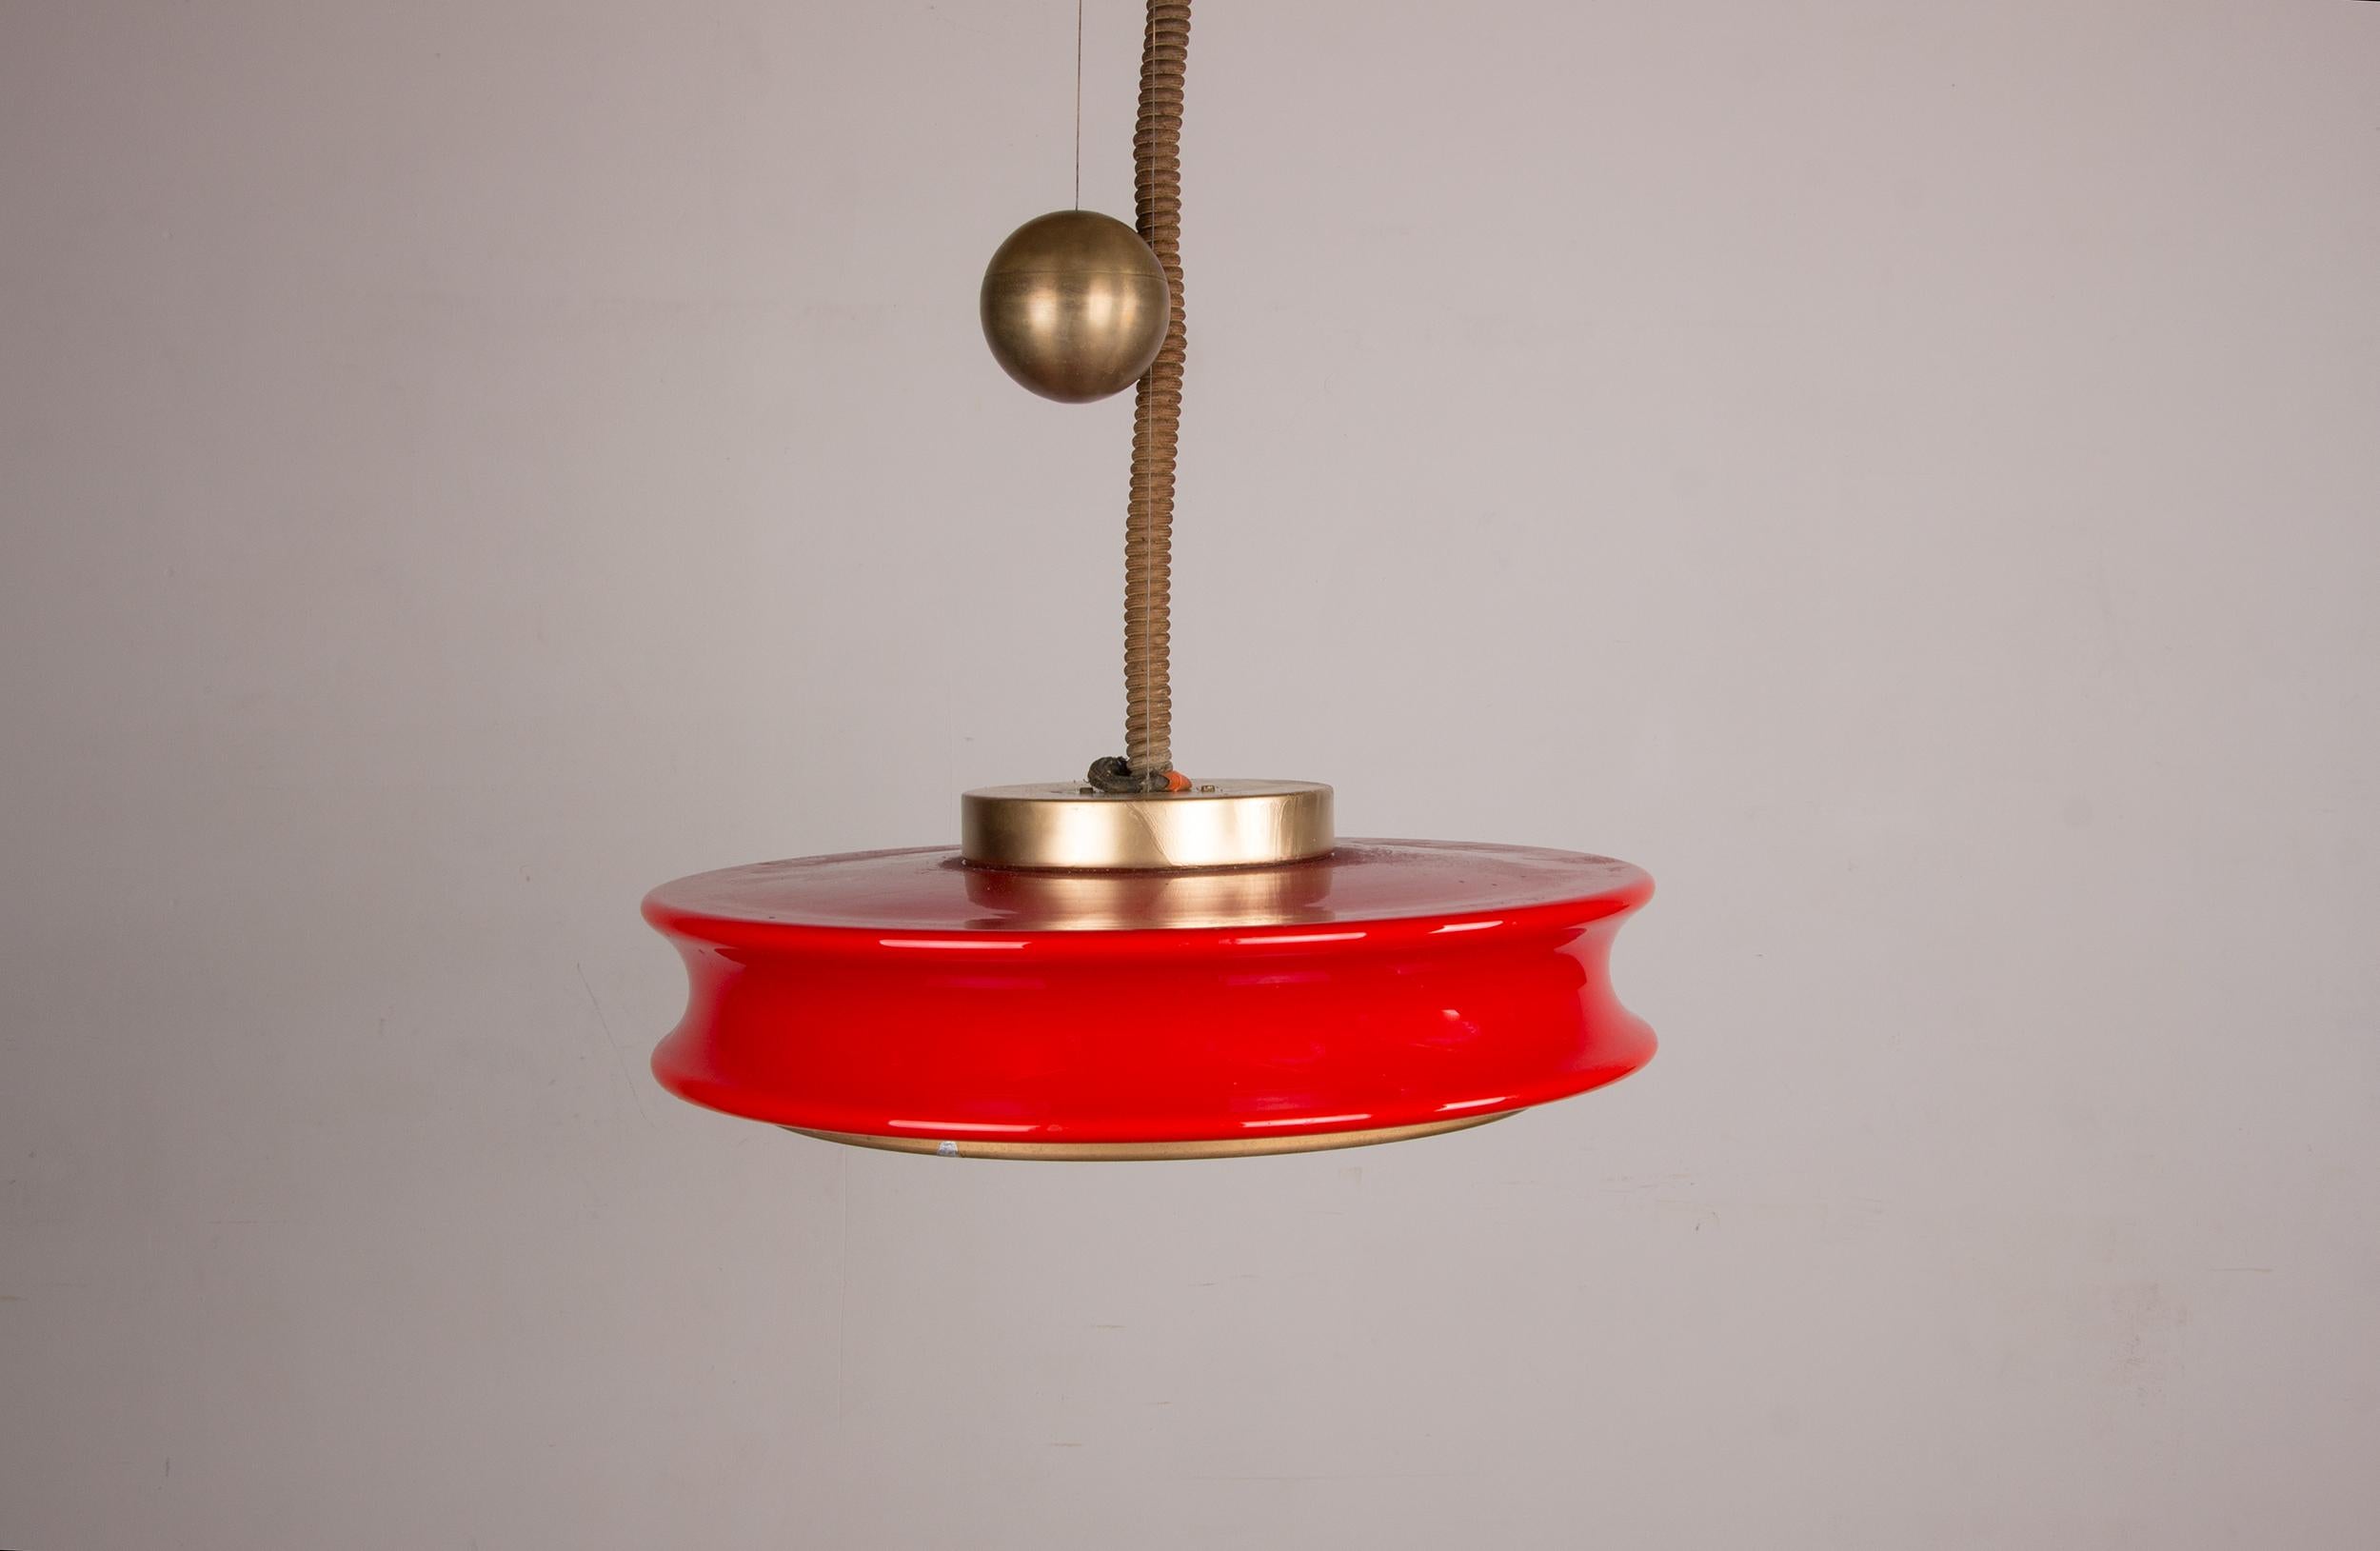 Exceptional large pendant chandelier, with a heavy spherical brass counterweight that allows height adjustment, a magnificent large red glass diffuser in a circular, contoured shape, and a gold grille with a concentric pattern at the base.
It